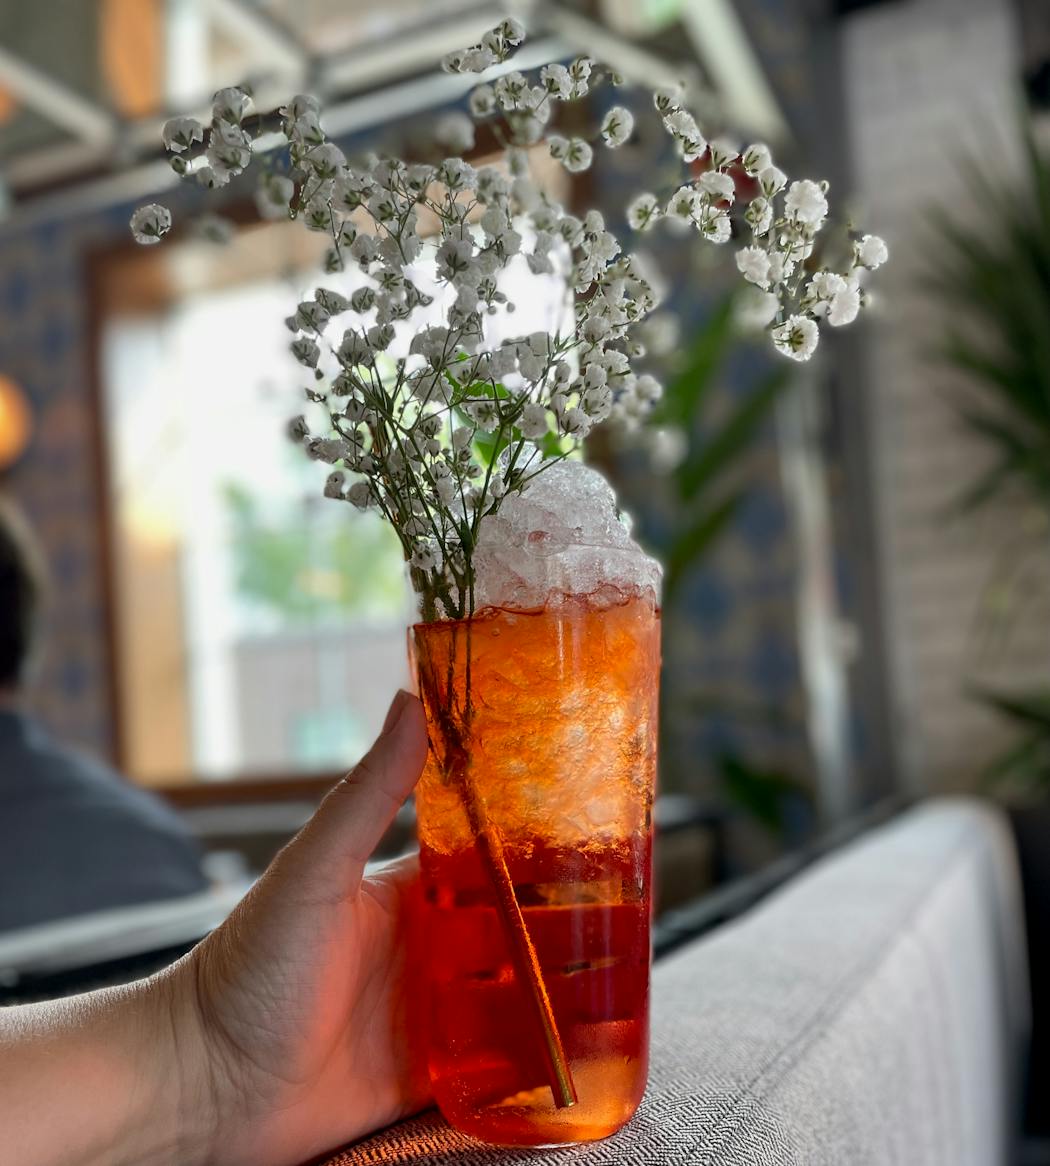 An Aperol Spritz sports a bridal bouquet’s worth of baby’s breath.